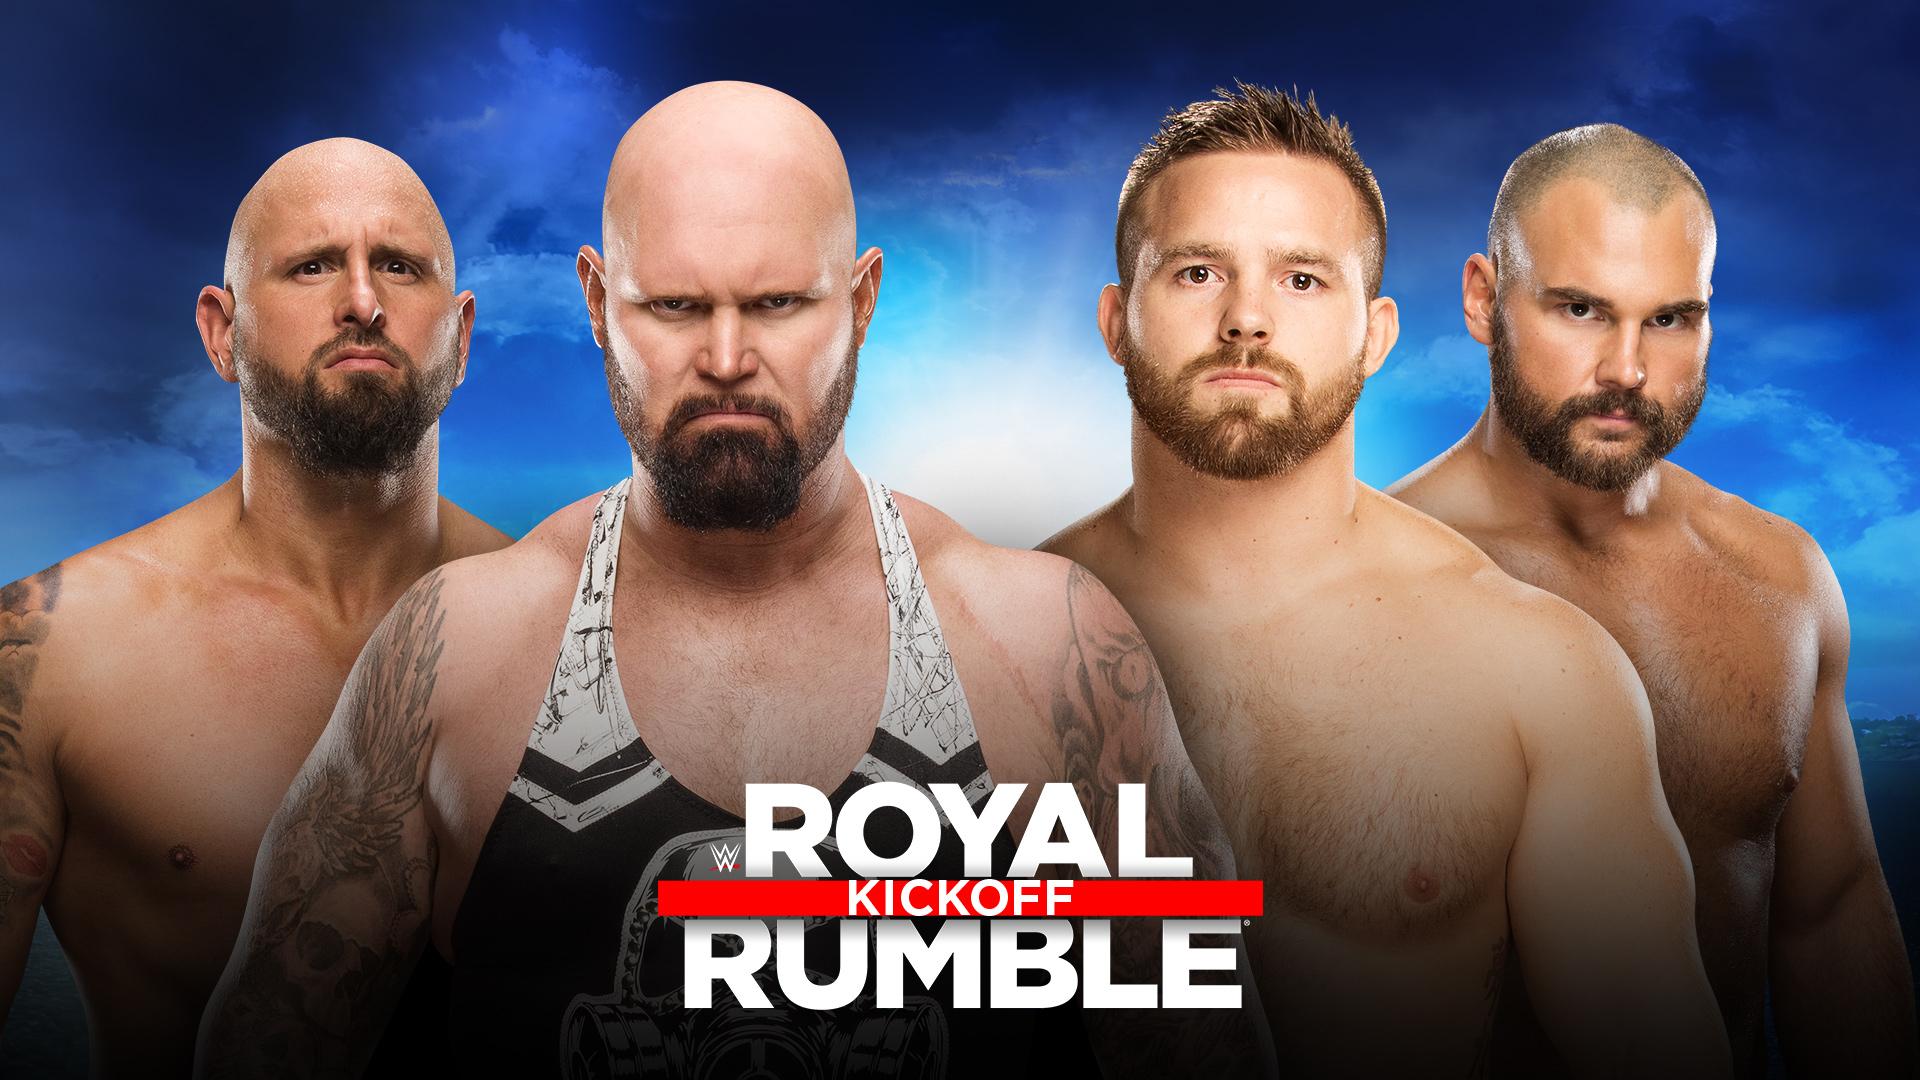 WWE Royal Rumble 2018 Live Blog and Results